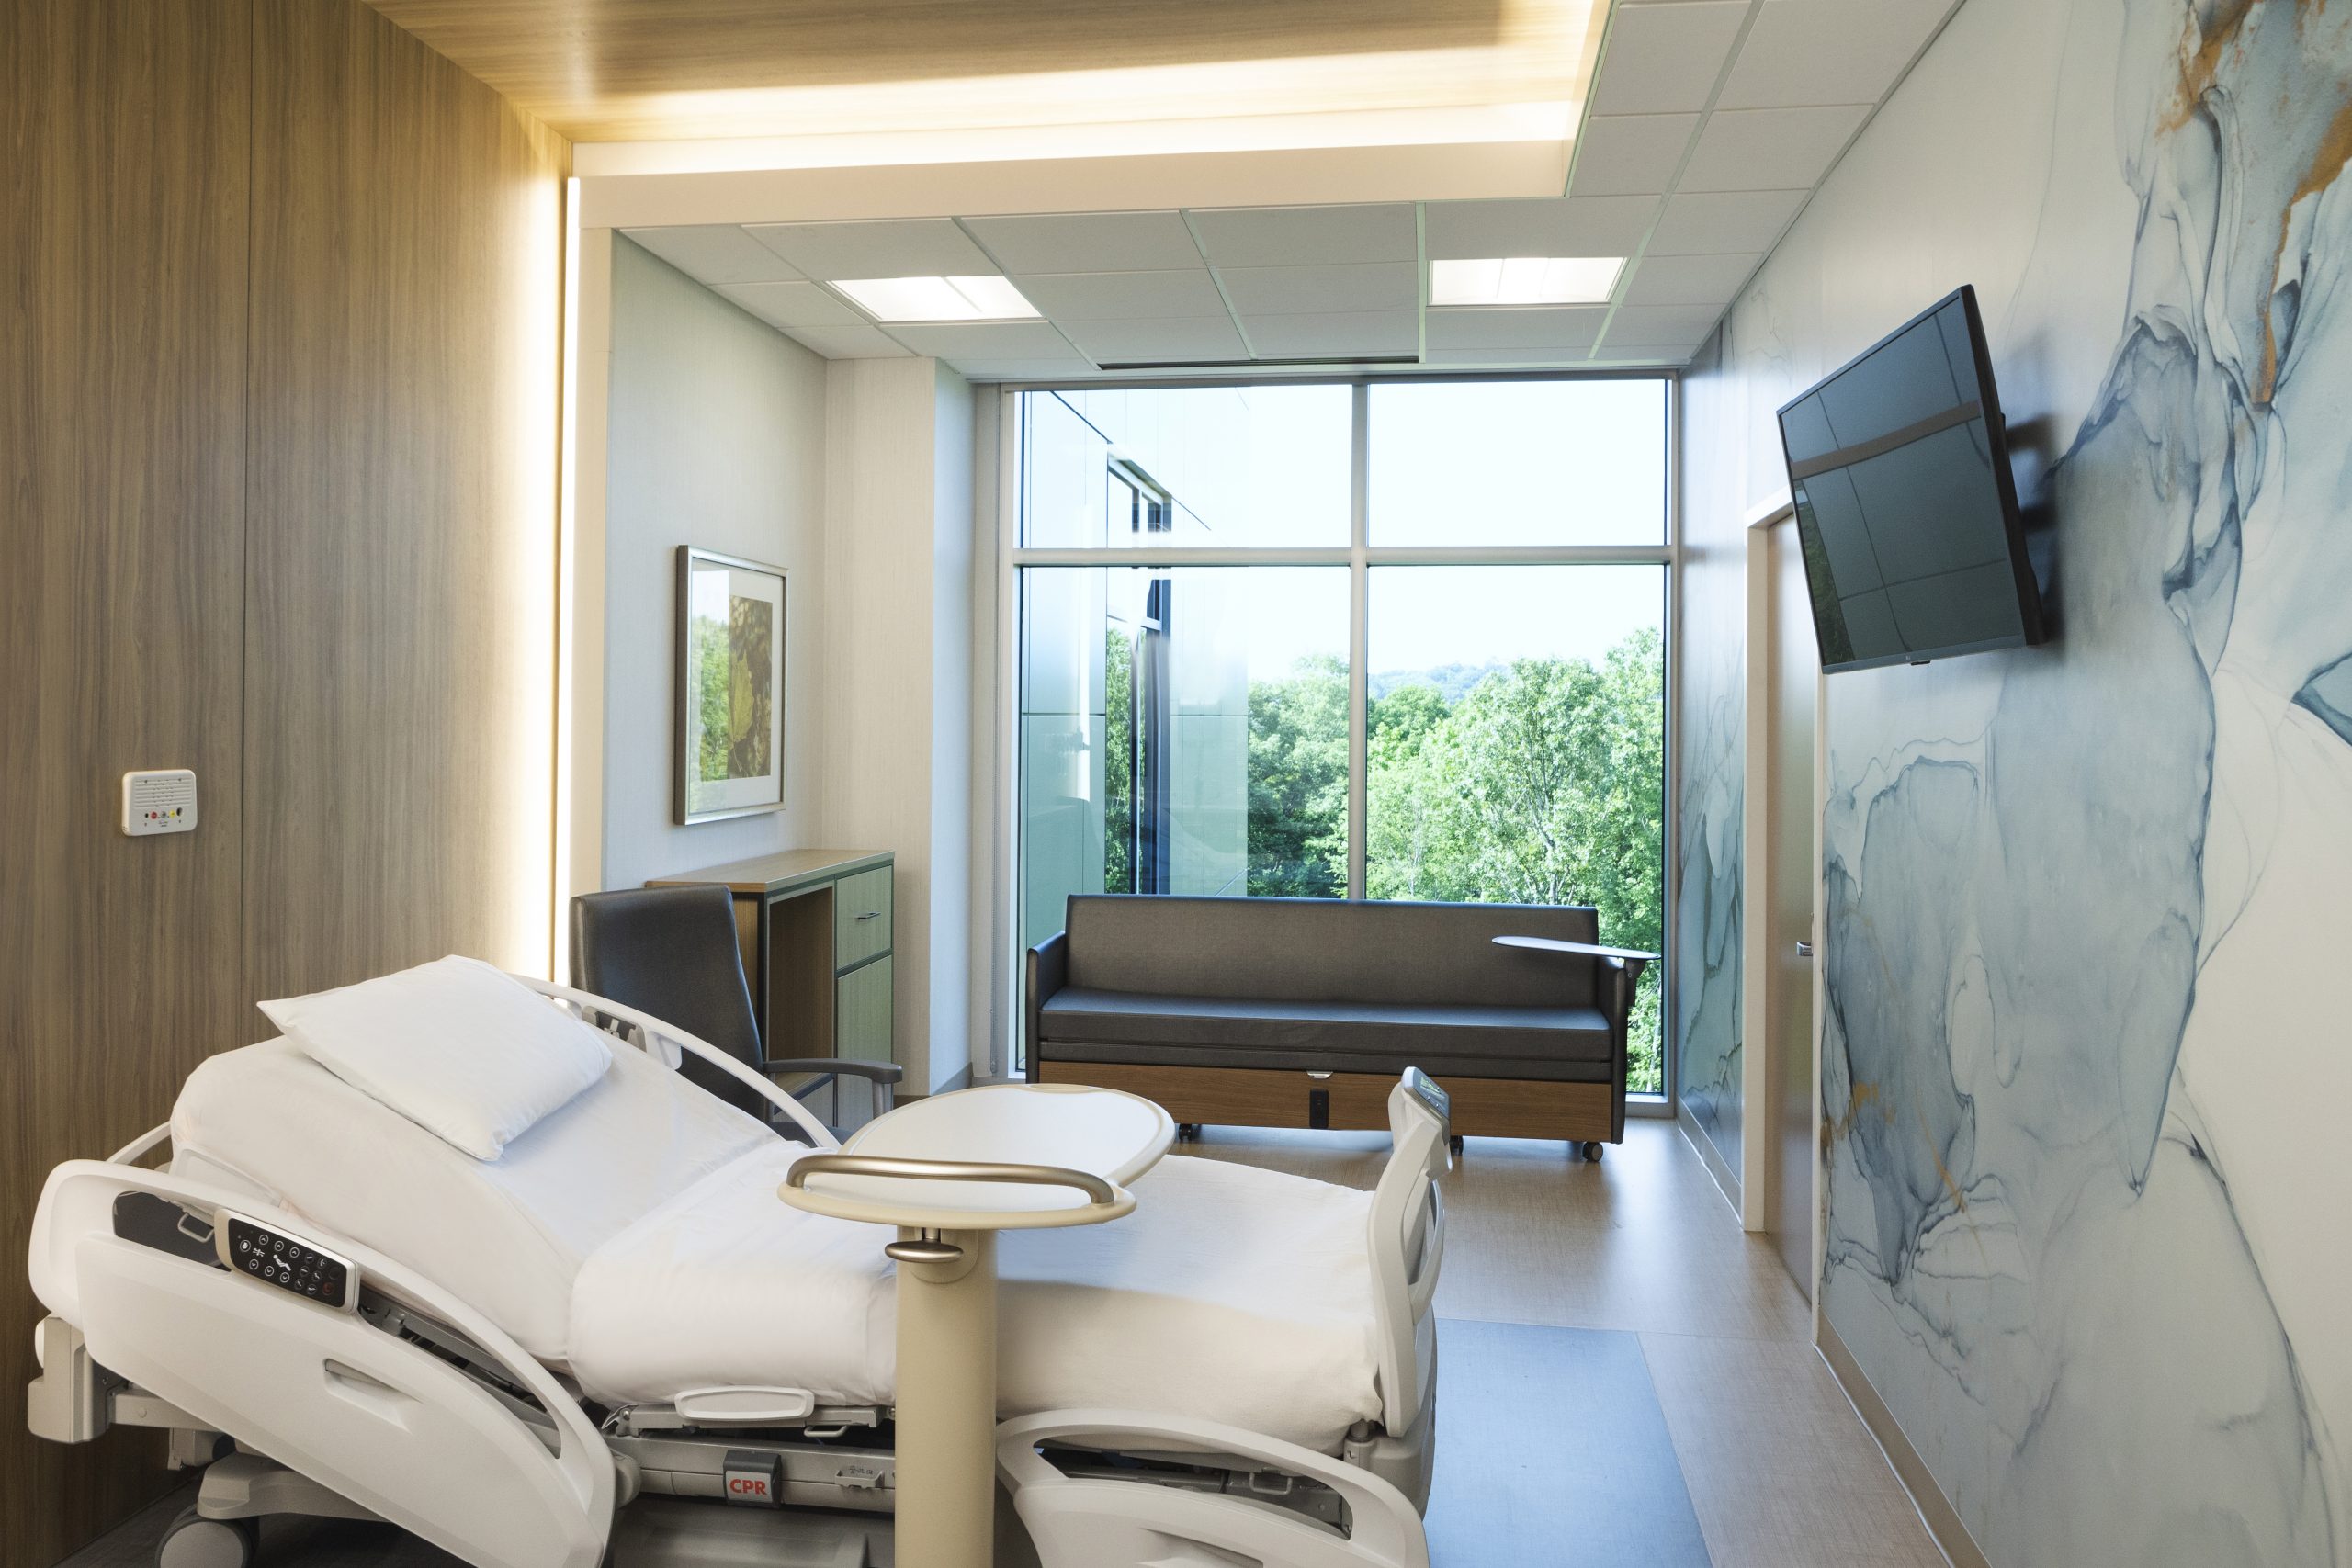 CARTI Surgery Center Patient Recovery Room